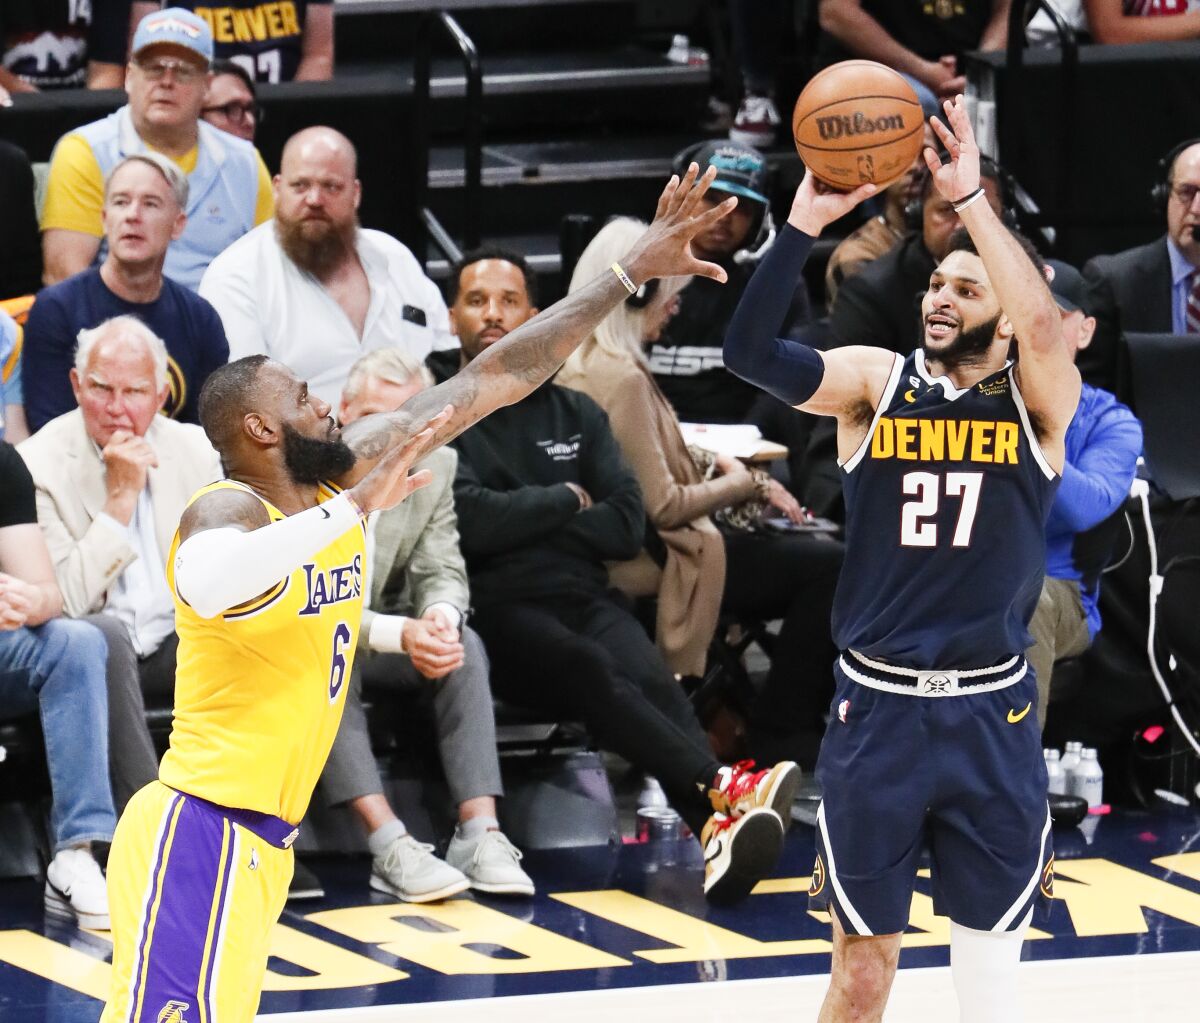 Denver Nuggets guard Jamal Murray shoots a three-point basket while Lakers forward LeBron James defends.